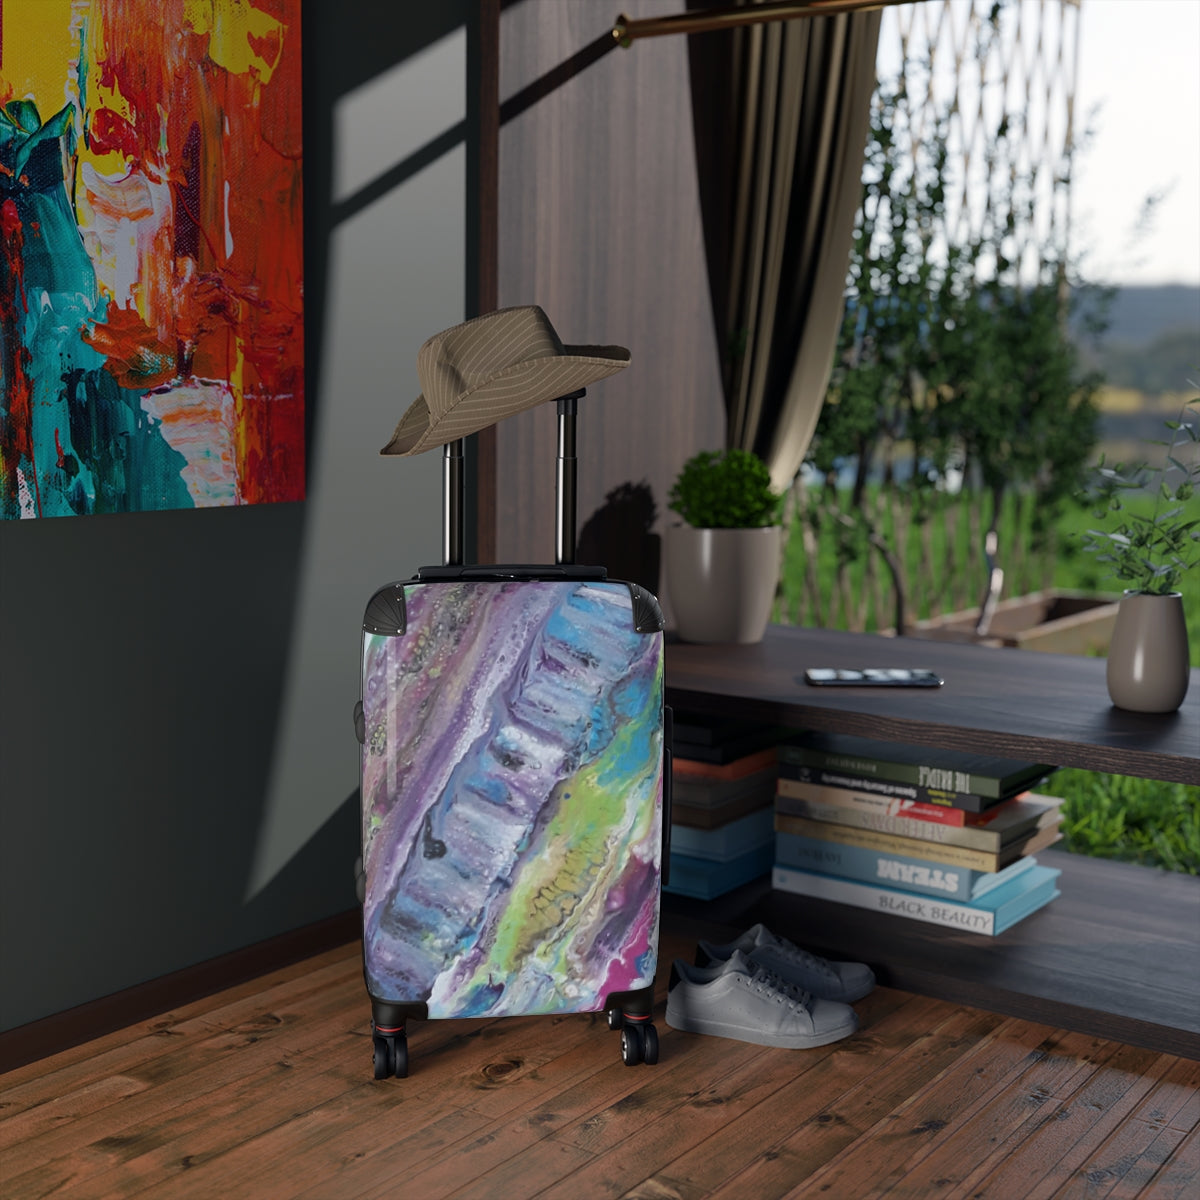 SUITCASES CARRY-ON By Artzira, Original Abstract Art Print, Cabin Suitcases, Luggage with Wheels, Trolly Travel Bag, Double Wheeled Spinner